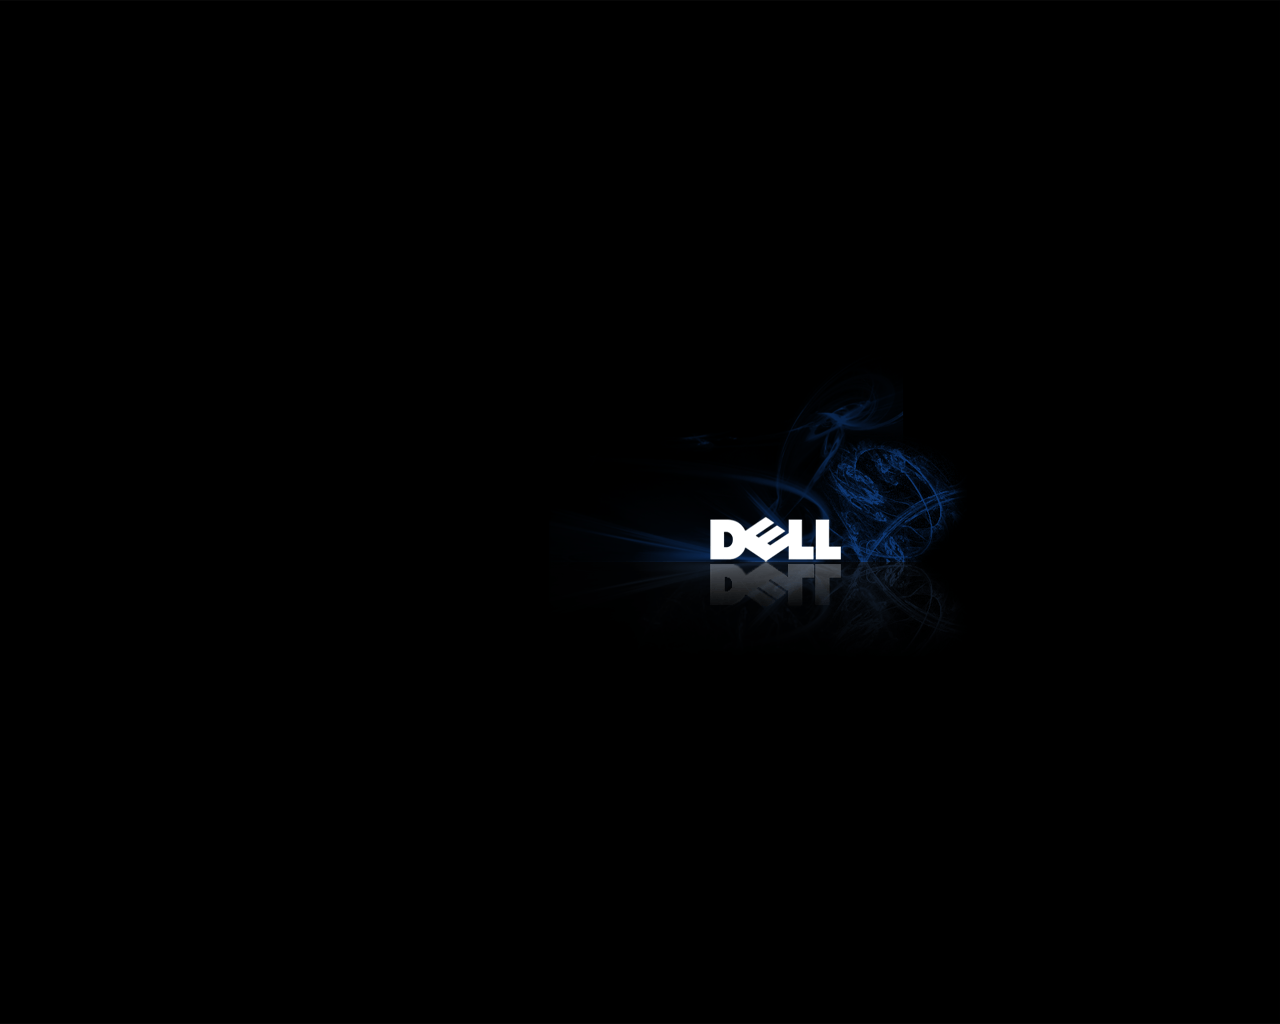 Dell 4K Wallpapers